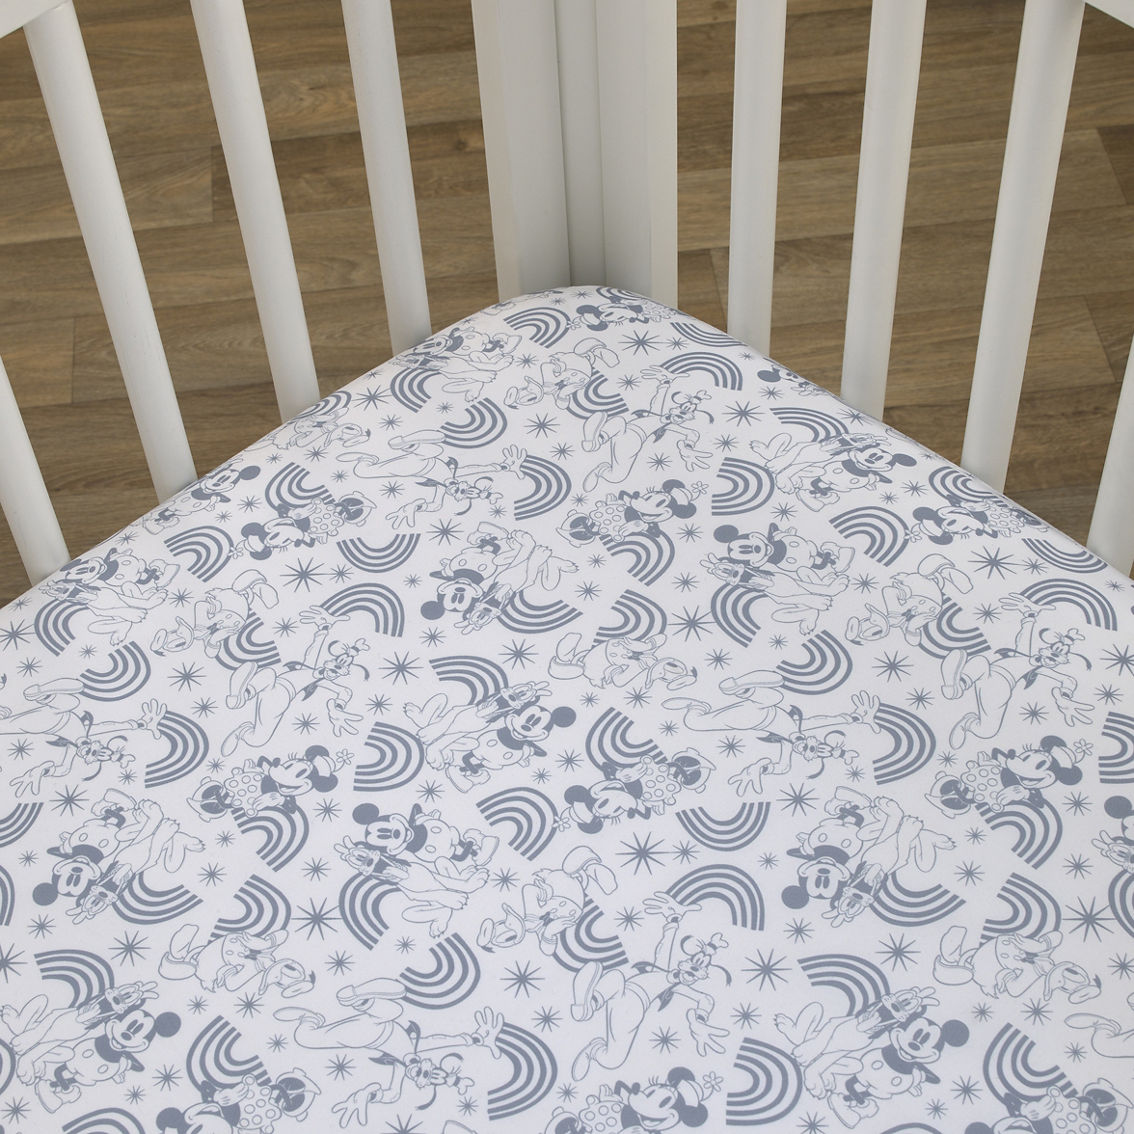 Disney Mickey and Friends Fitted Crib Sheet - Image 2 of 4